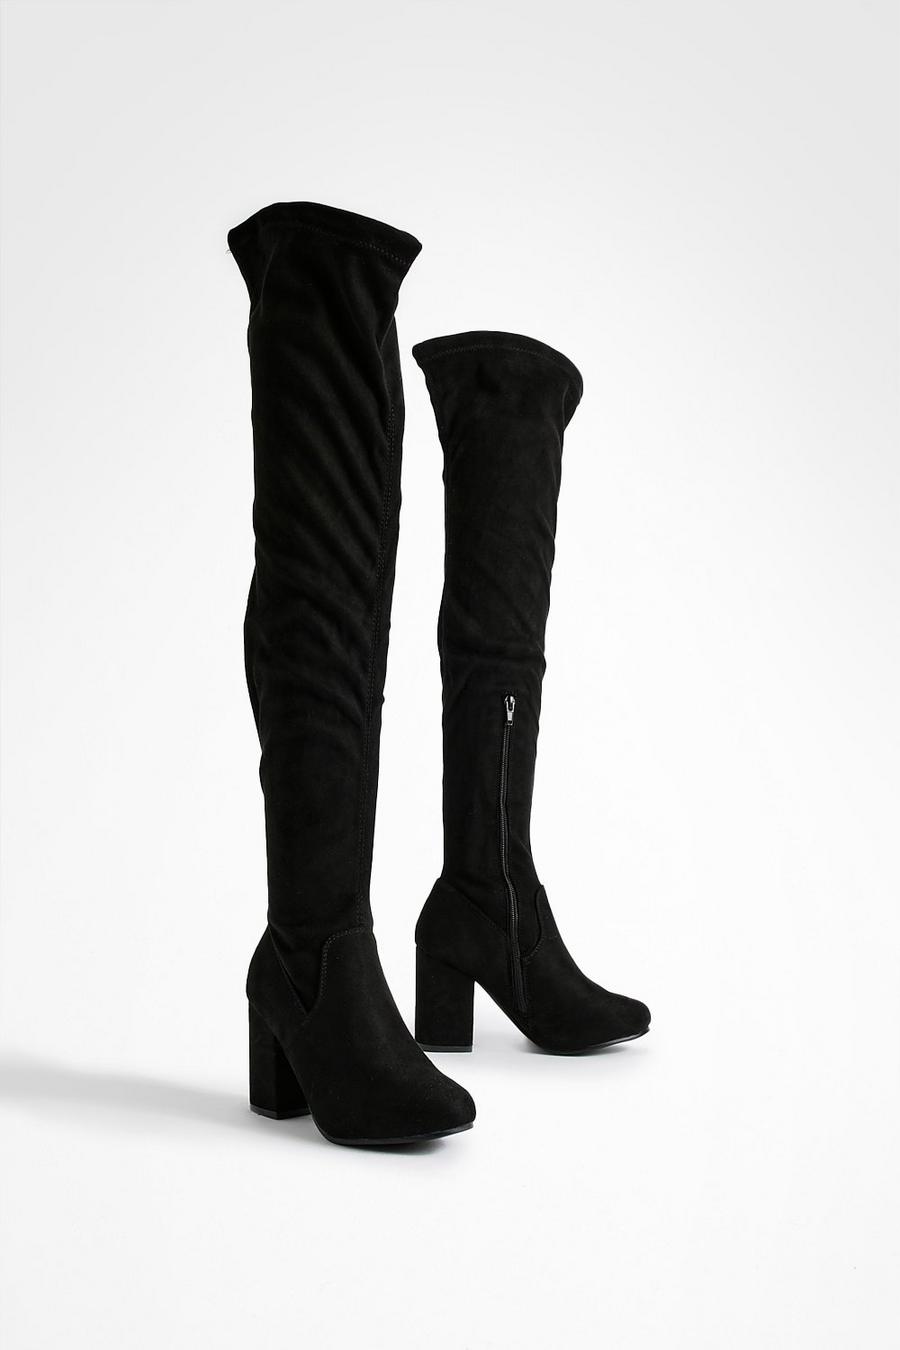 Black Wide Fit Stretch Block Heel Over The Knee Boots